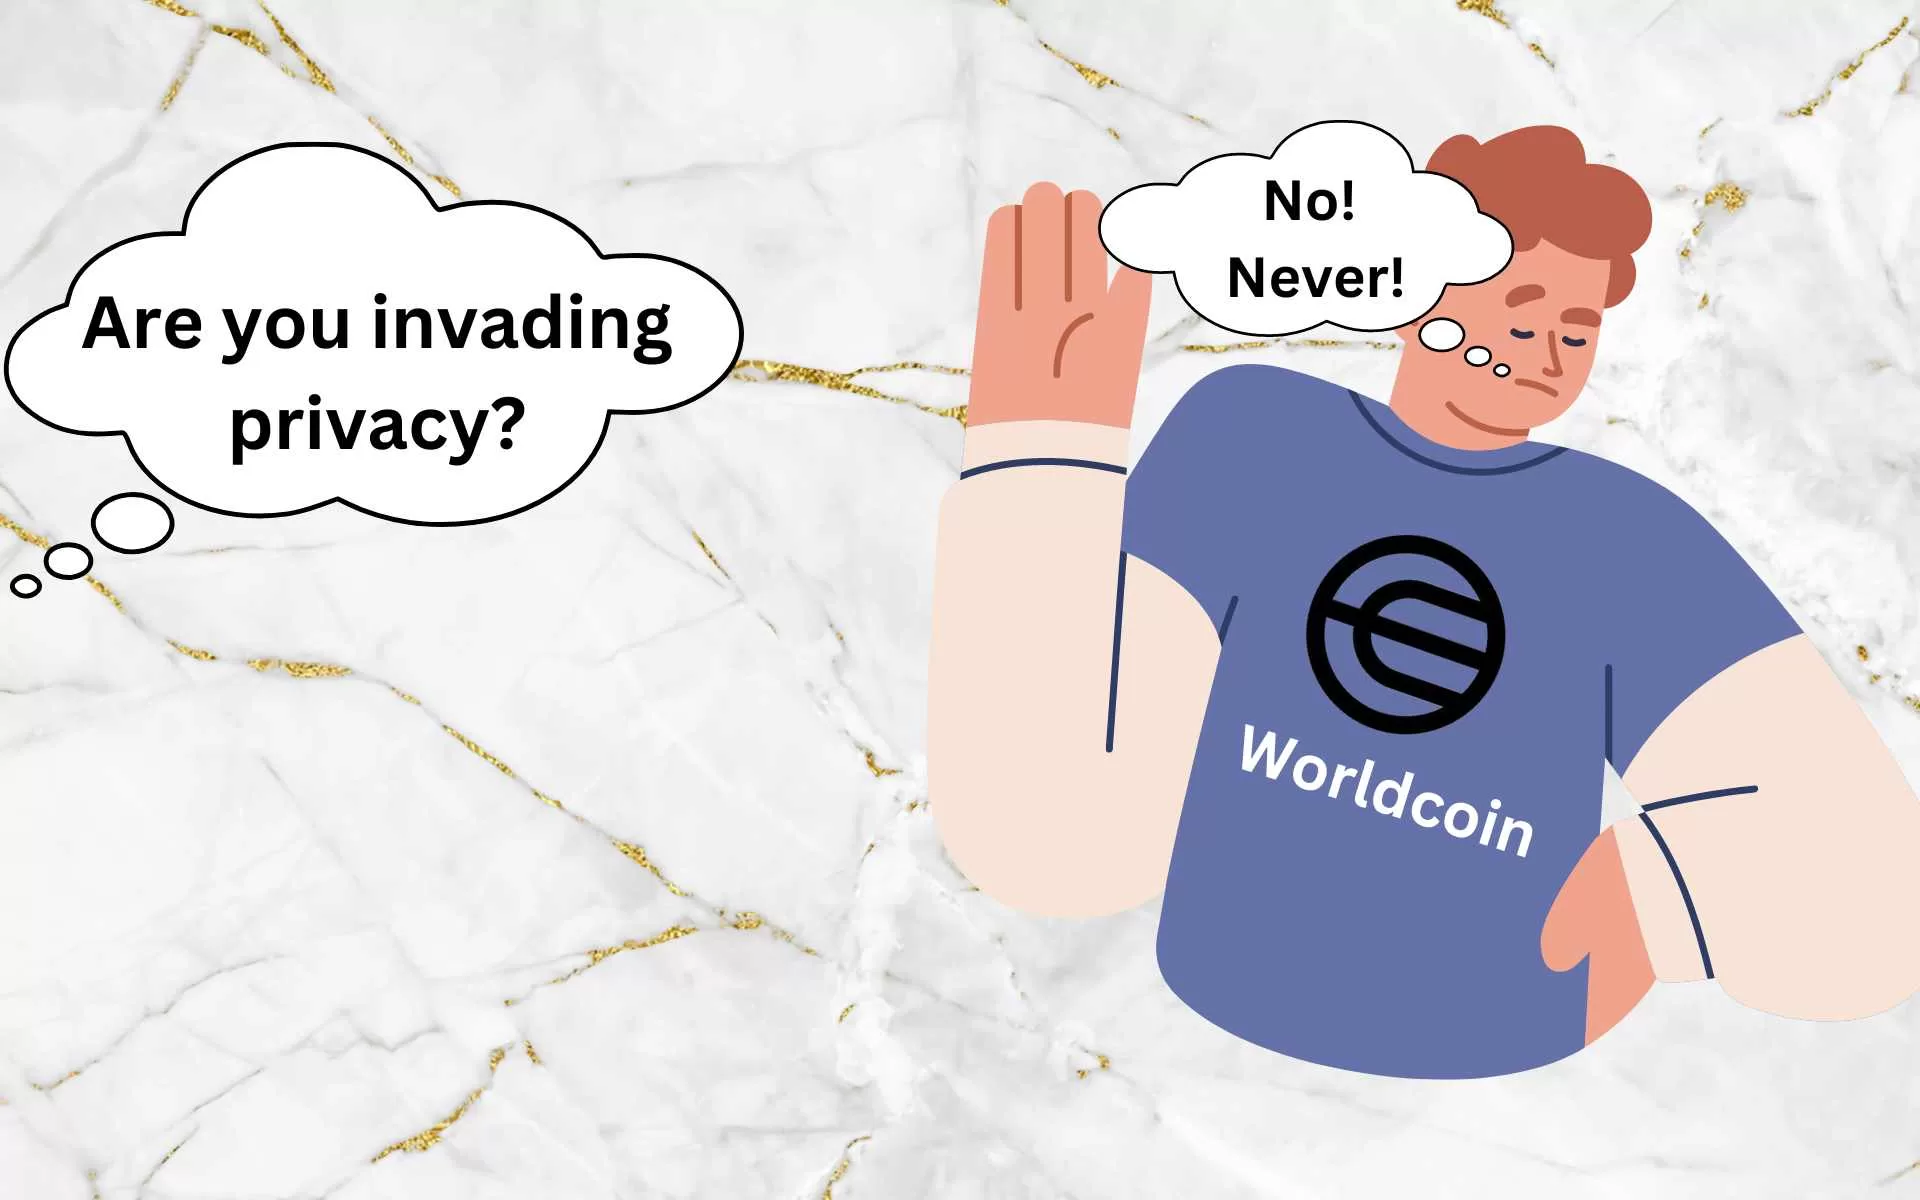 Worldcoin's Claims on Enabling Privacy